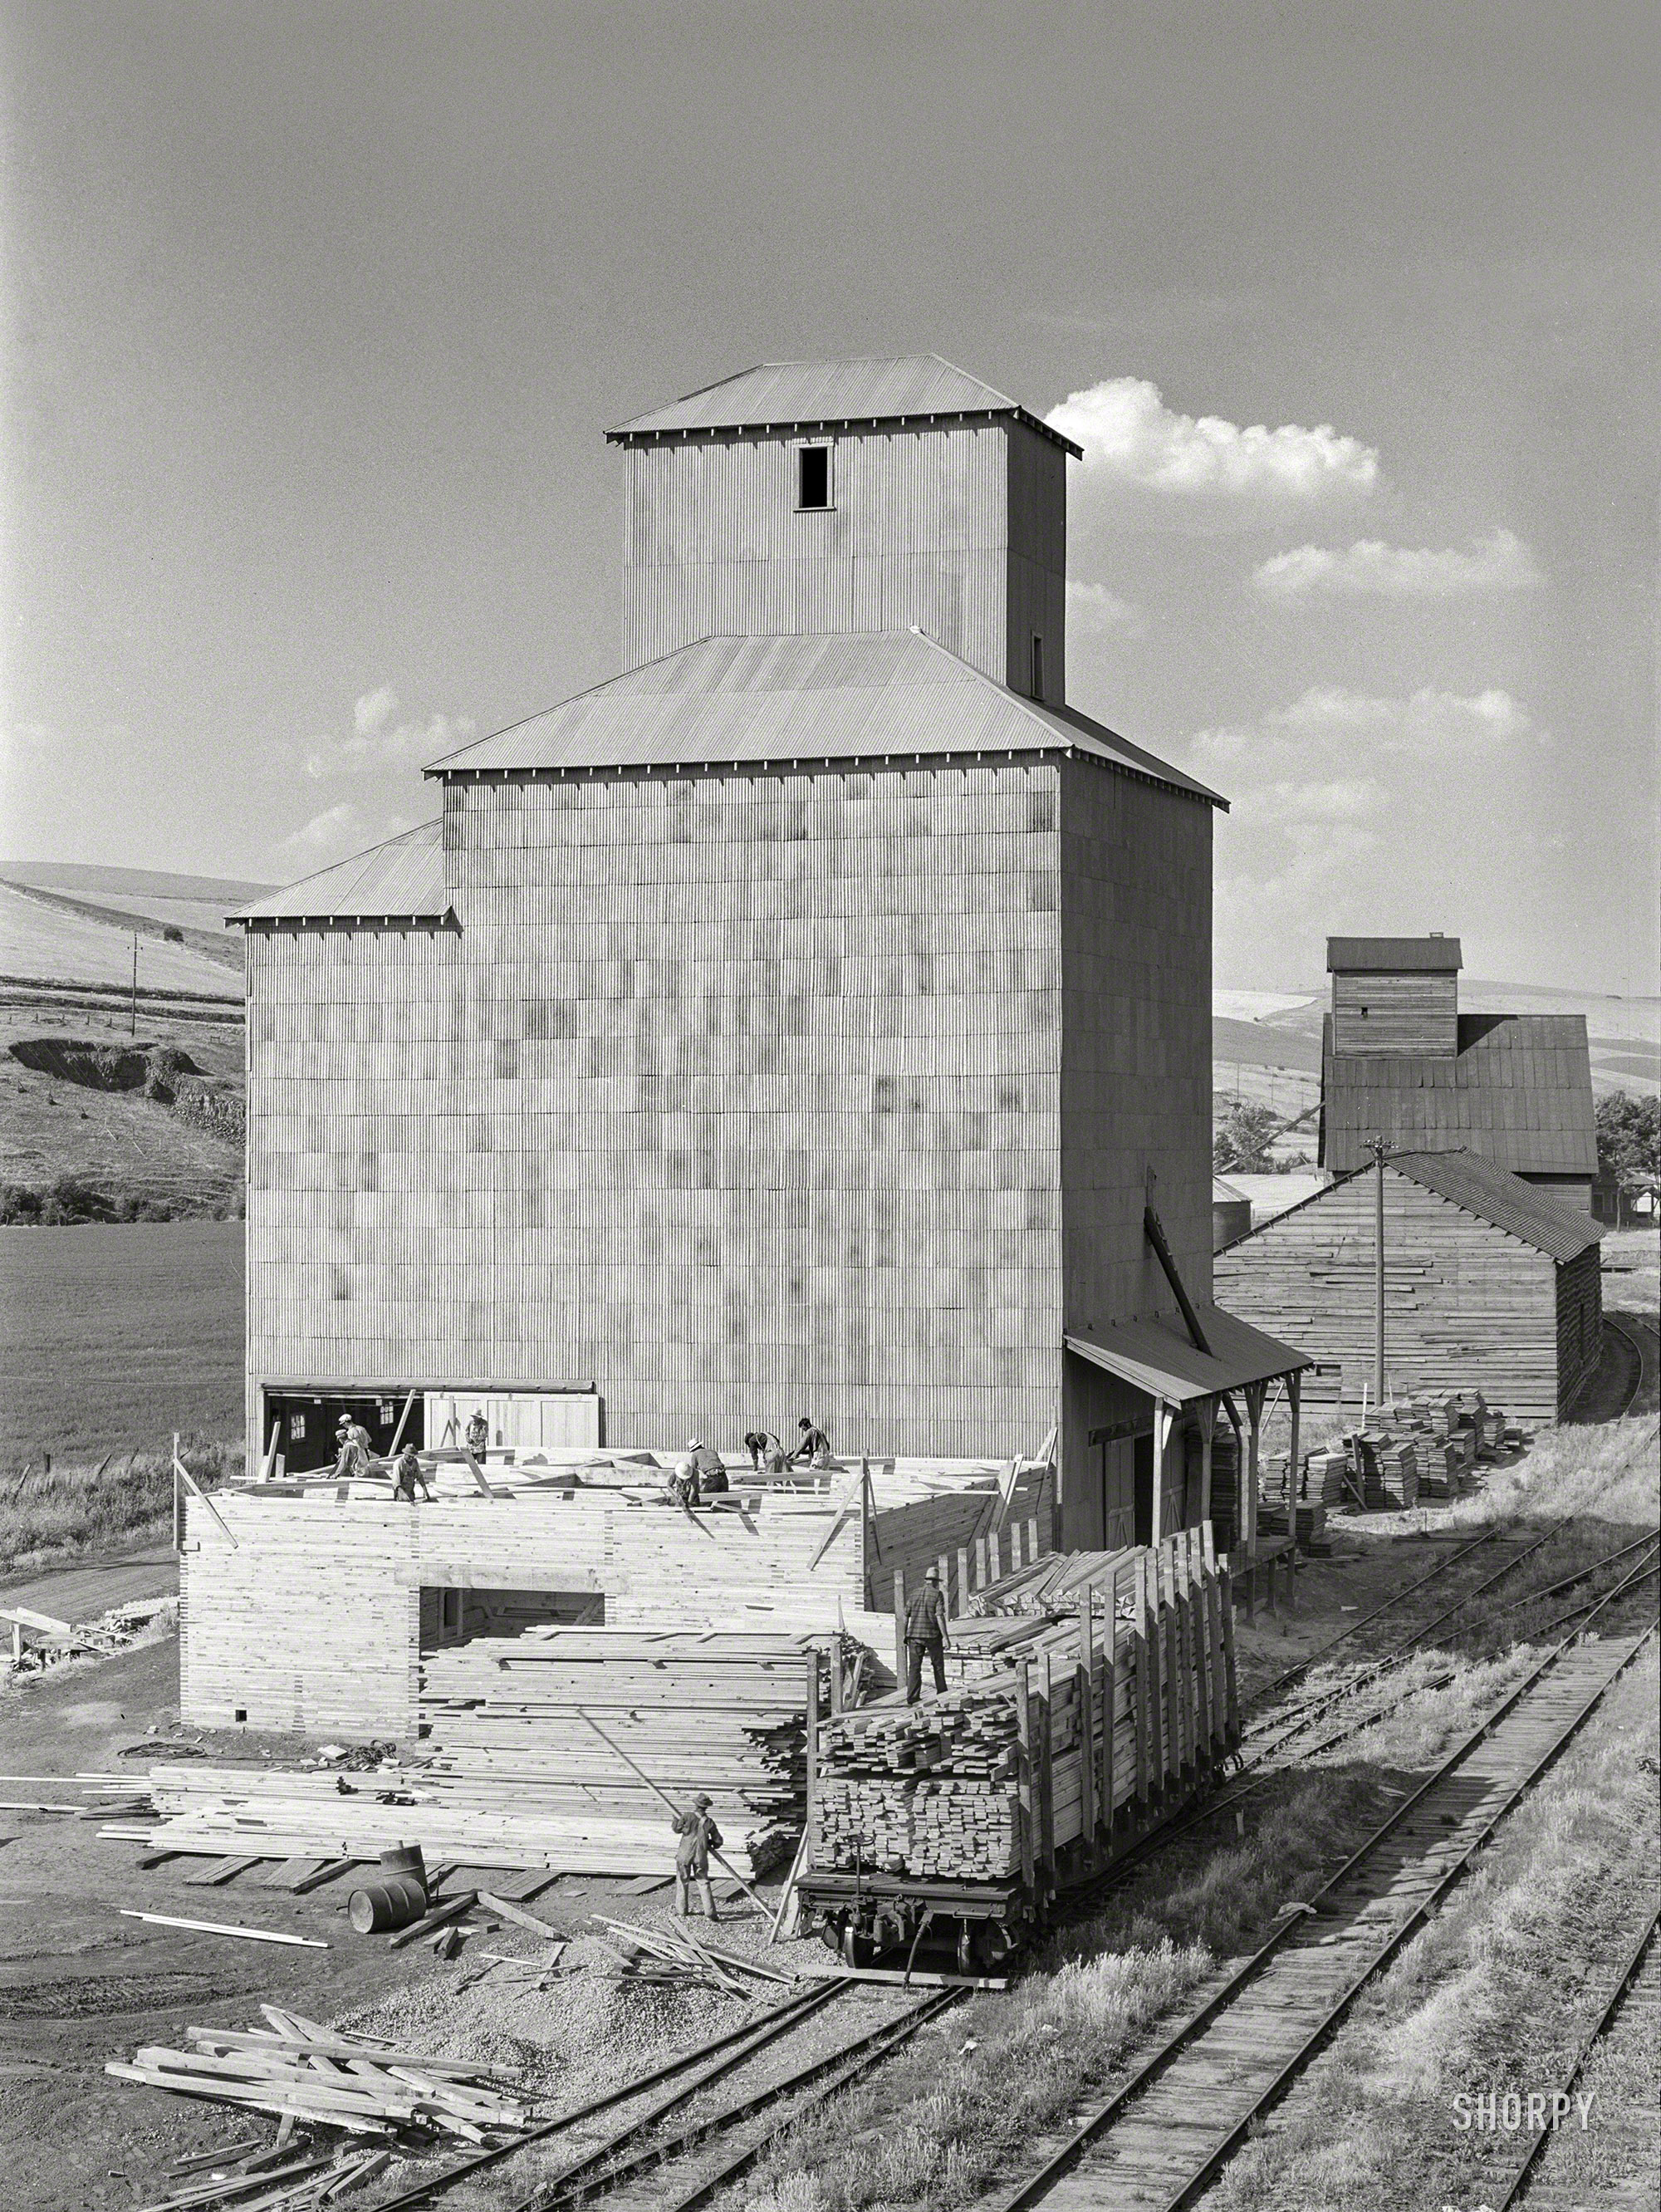 July 1941. "Adding new storage space to wheat elevator at Dayton, Washington. High yields of wheat this year were taxing storage facilities; they were getting ready for a bumper crop." Acetate negative by Russell Lee. View full size.